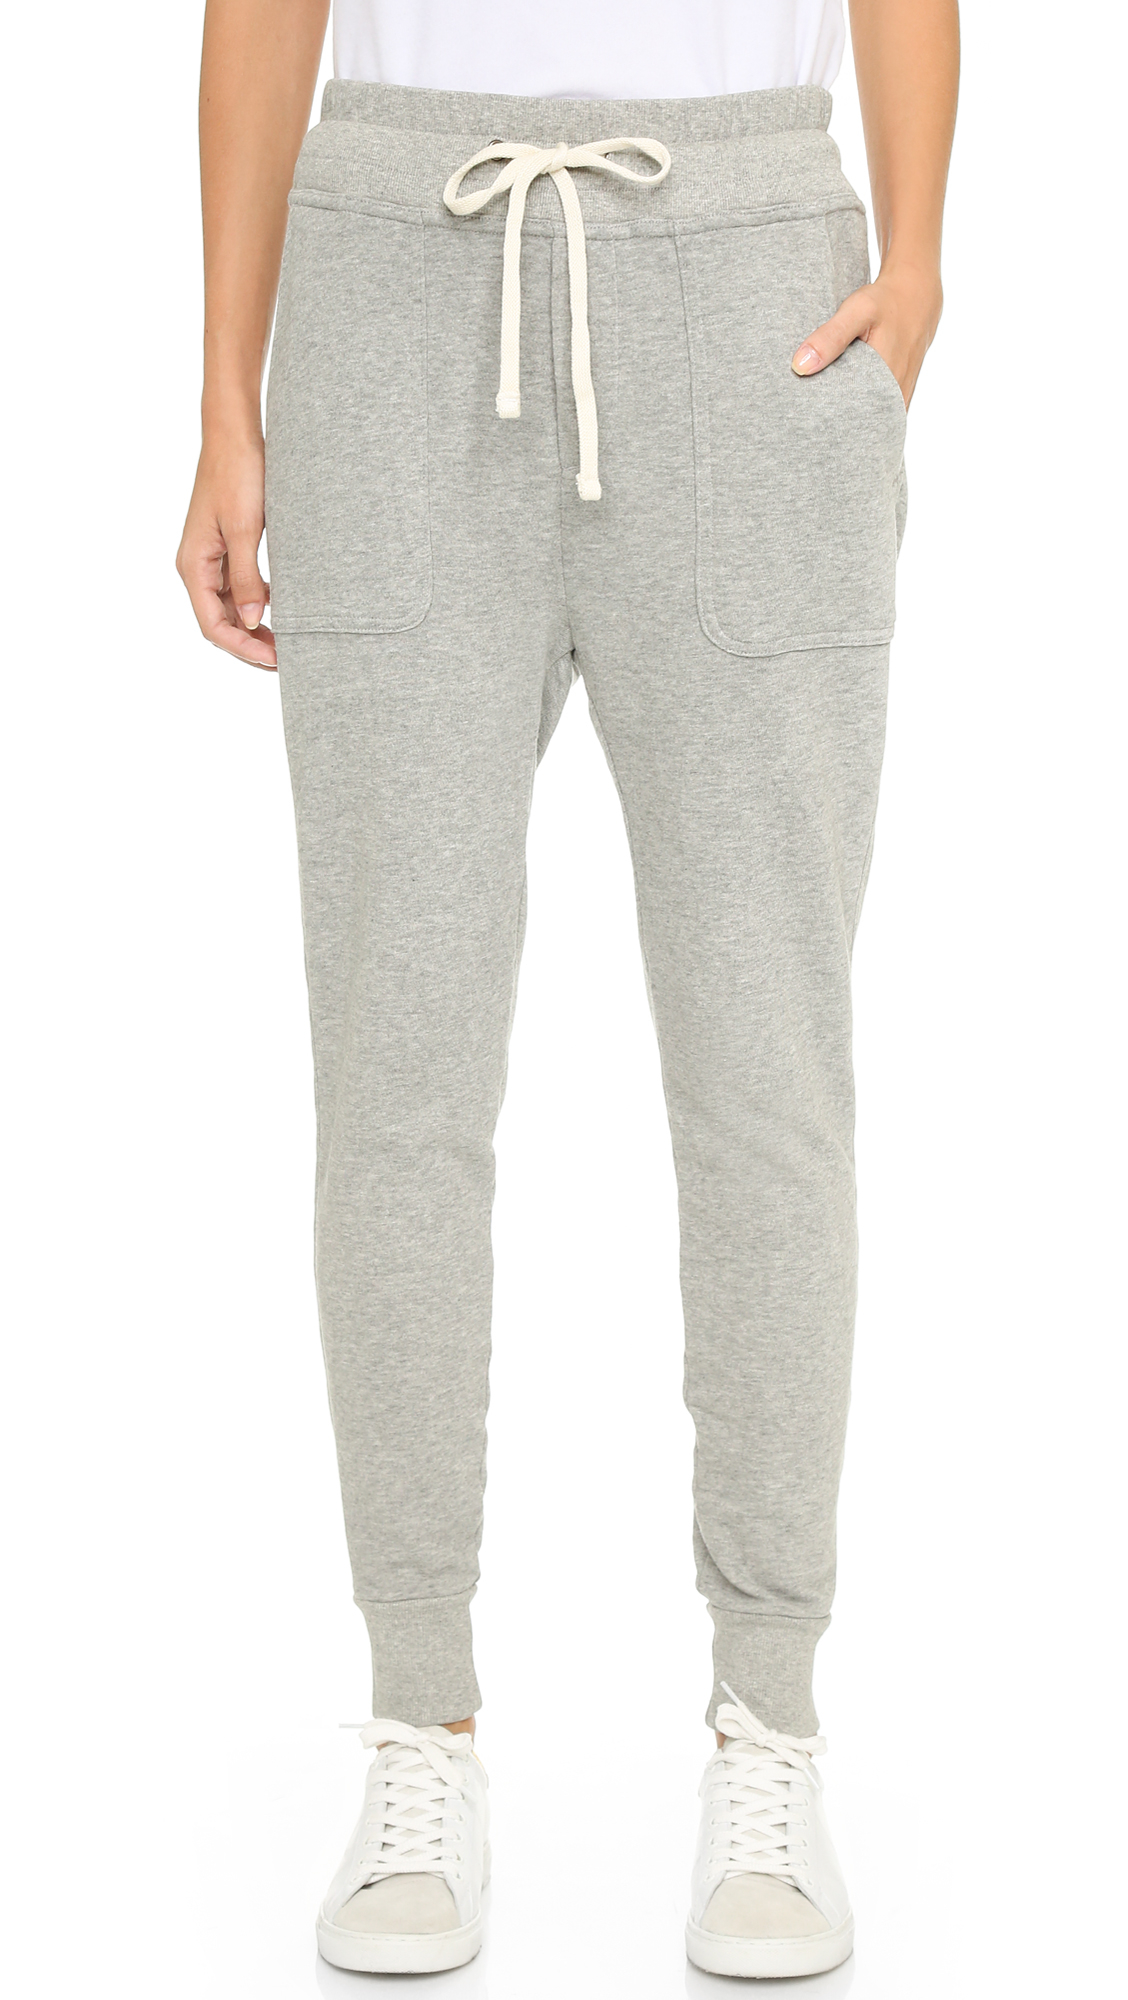 James perse Slouchy Sweatpants - Heather Grey in Gray | Lyst